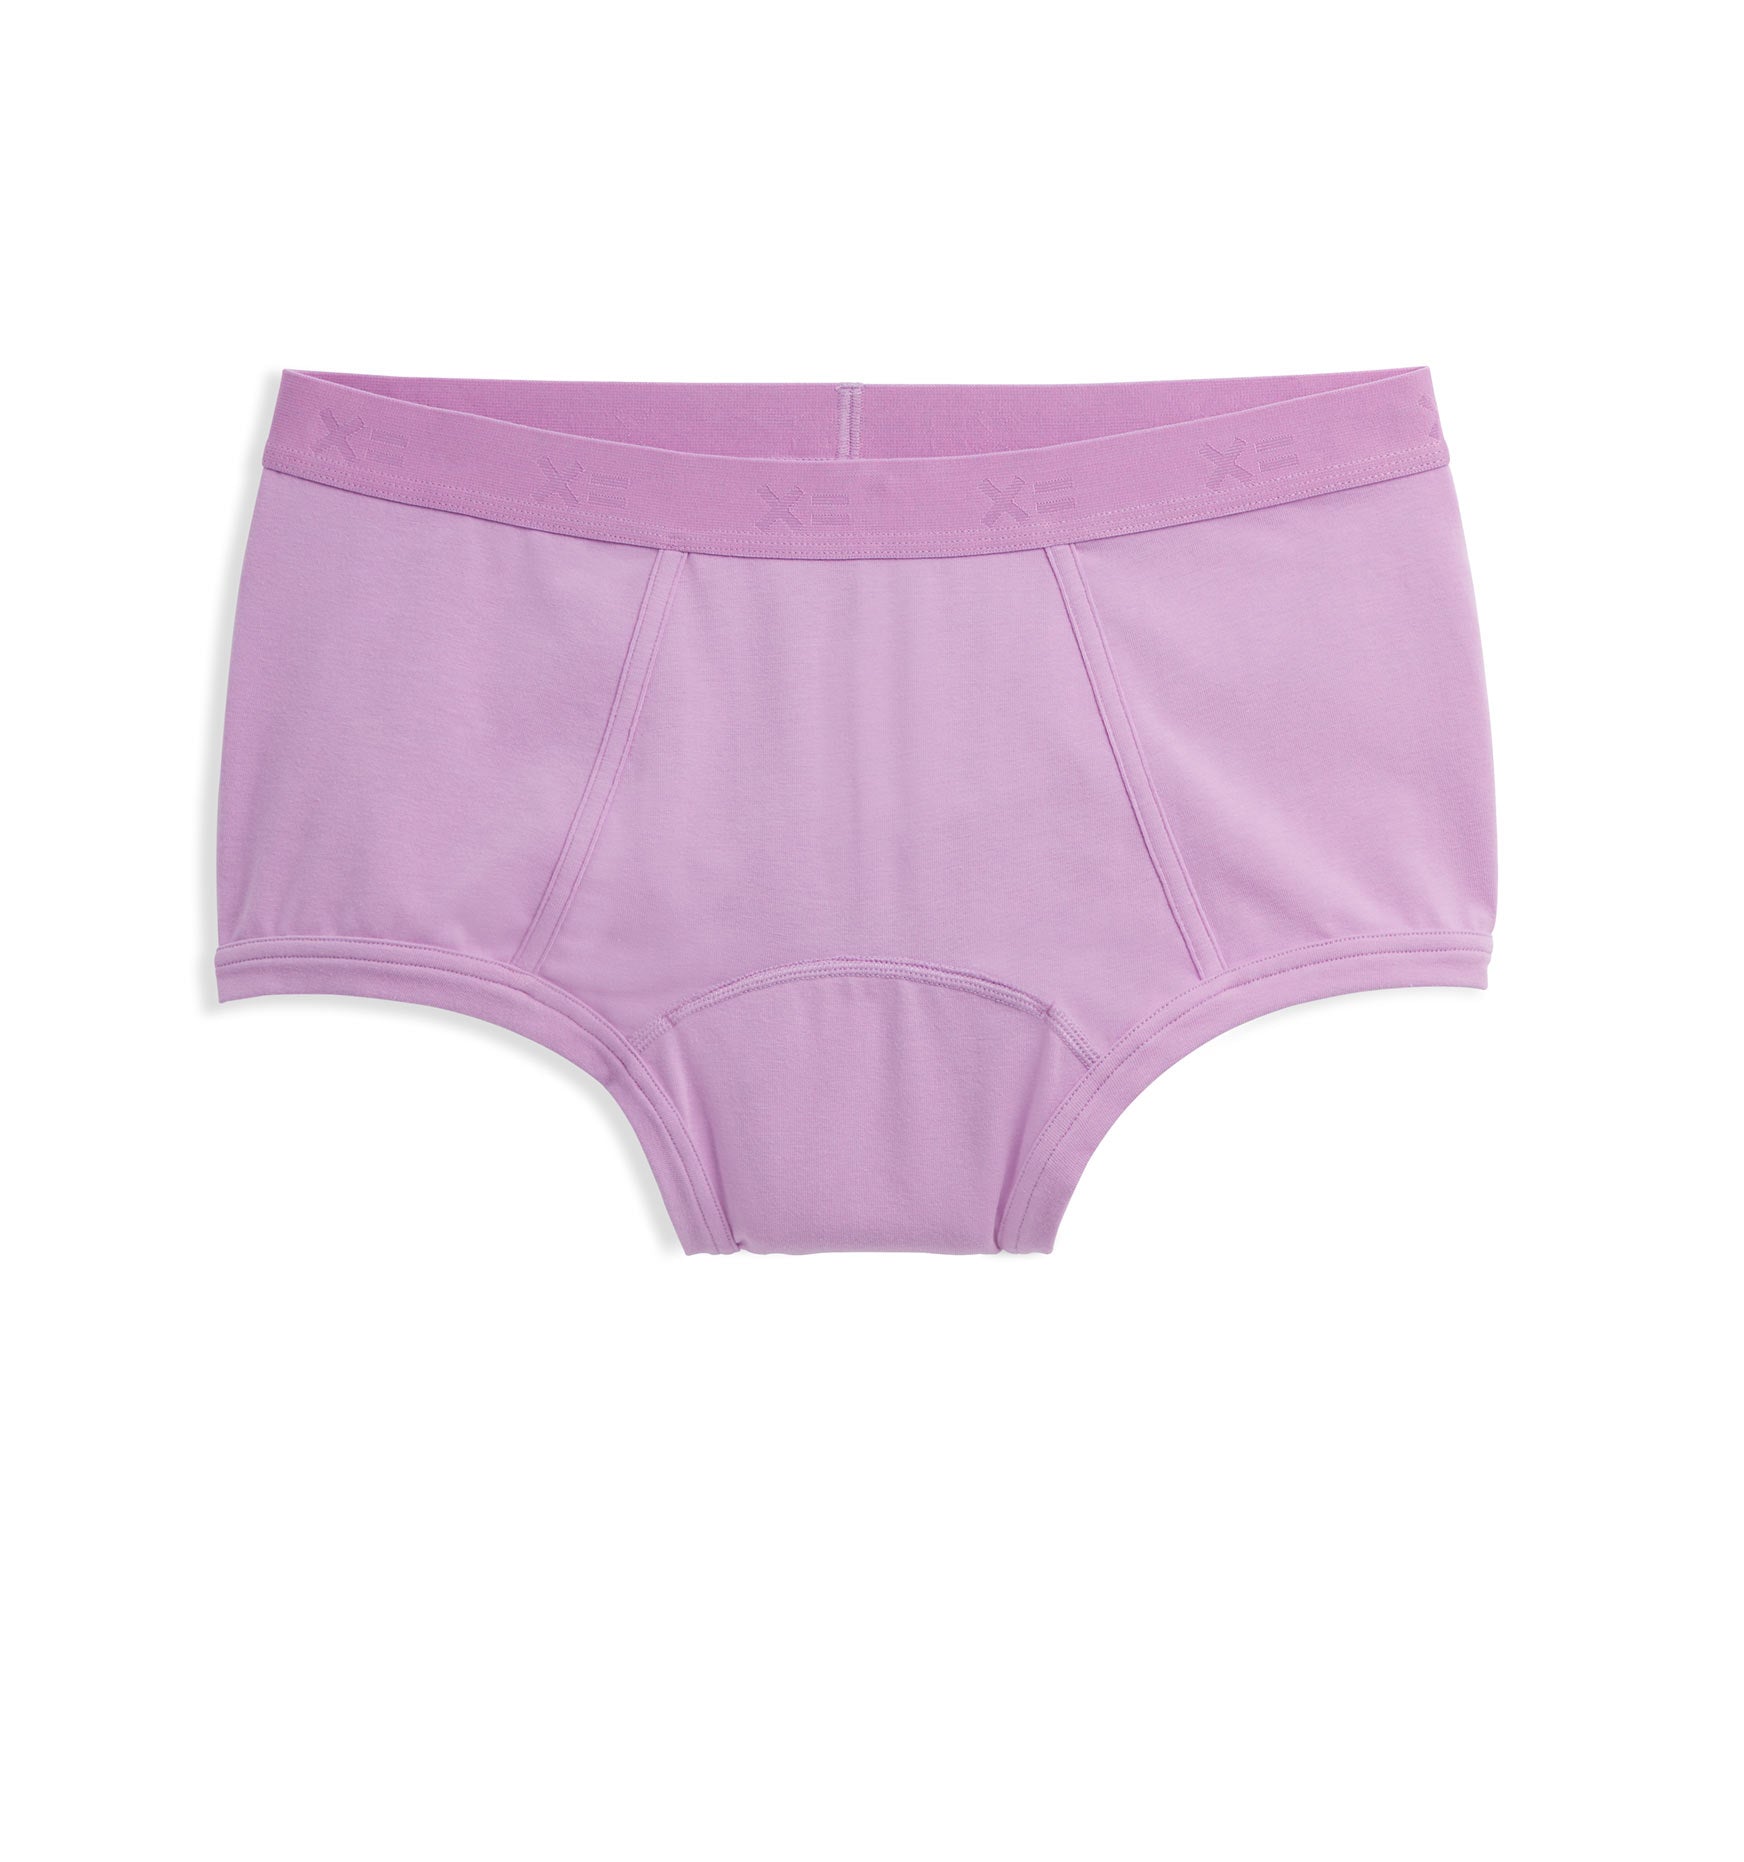  LAQREE Women's Sanitary Shorts, Boxer Type, Water Absorbent, Sanitary  Shorts, No Napkins Needed : Health & Personal Care